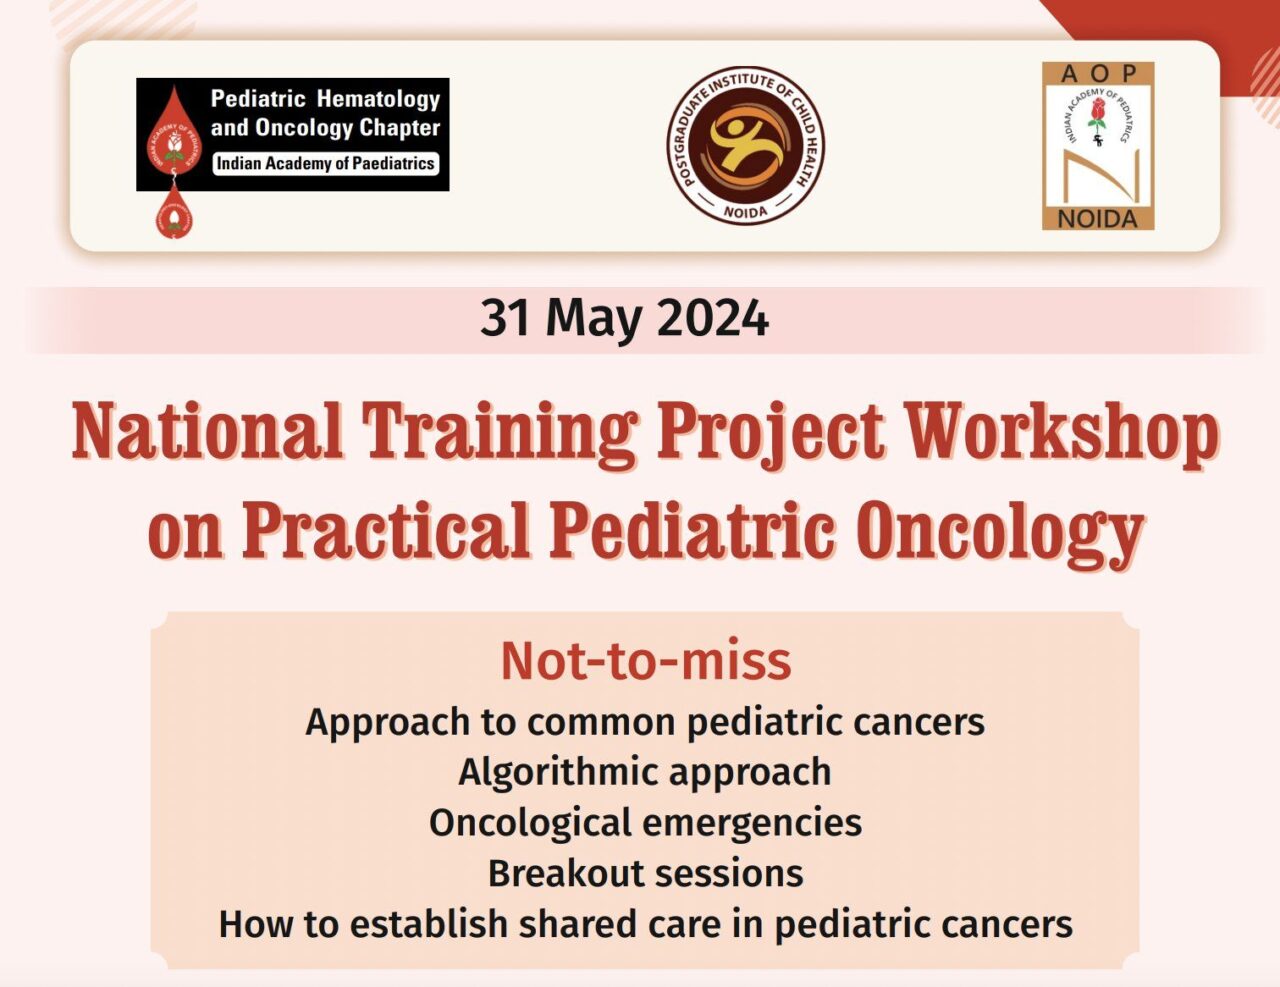 Nita Radhakrishnan: PGICH is happy to host a workshop on Practical Pediatric Oncology with PHO India and AOP Noida